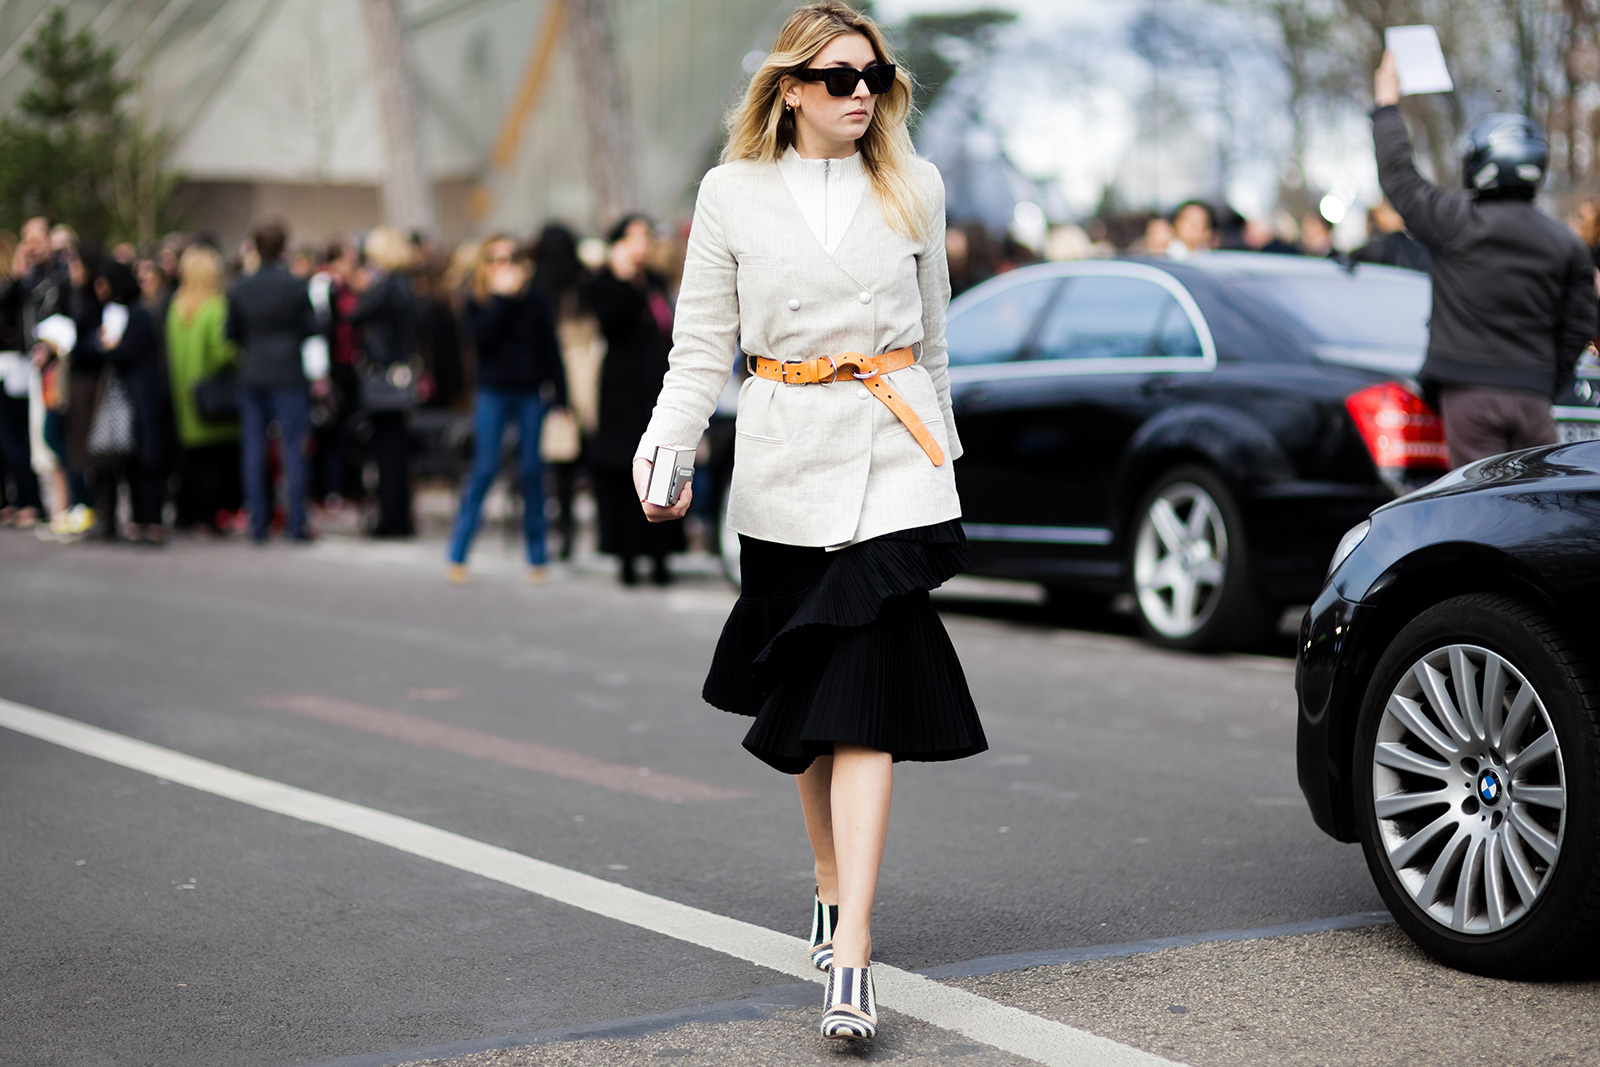 Camille Charrière wearing a Carin Wester blazer, Acne Studios belt, Thakoon ruffled skirt and Chloe wedges, before the Louis Vuitton Fall 2015 fashion show in Paris, France